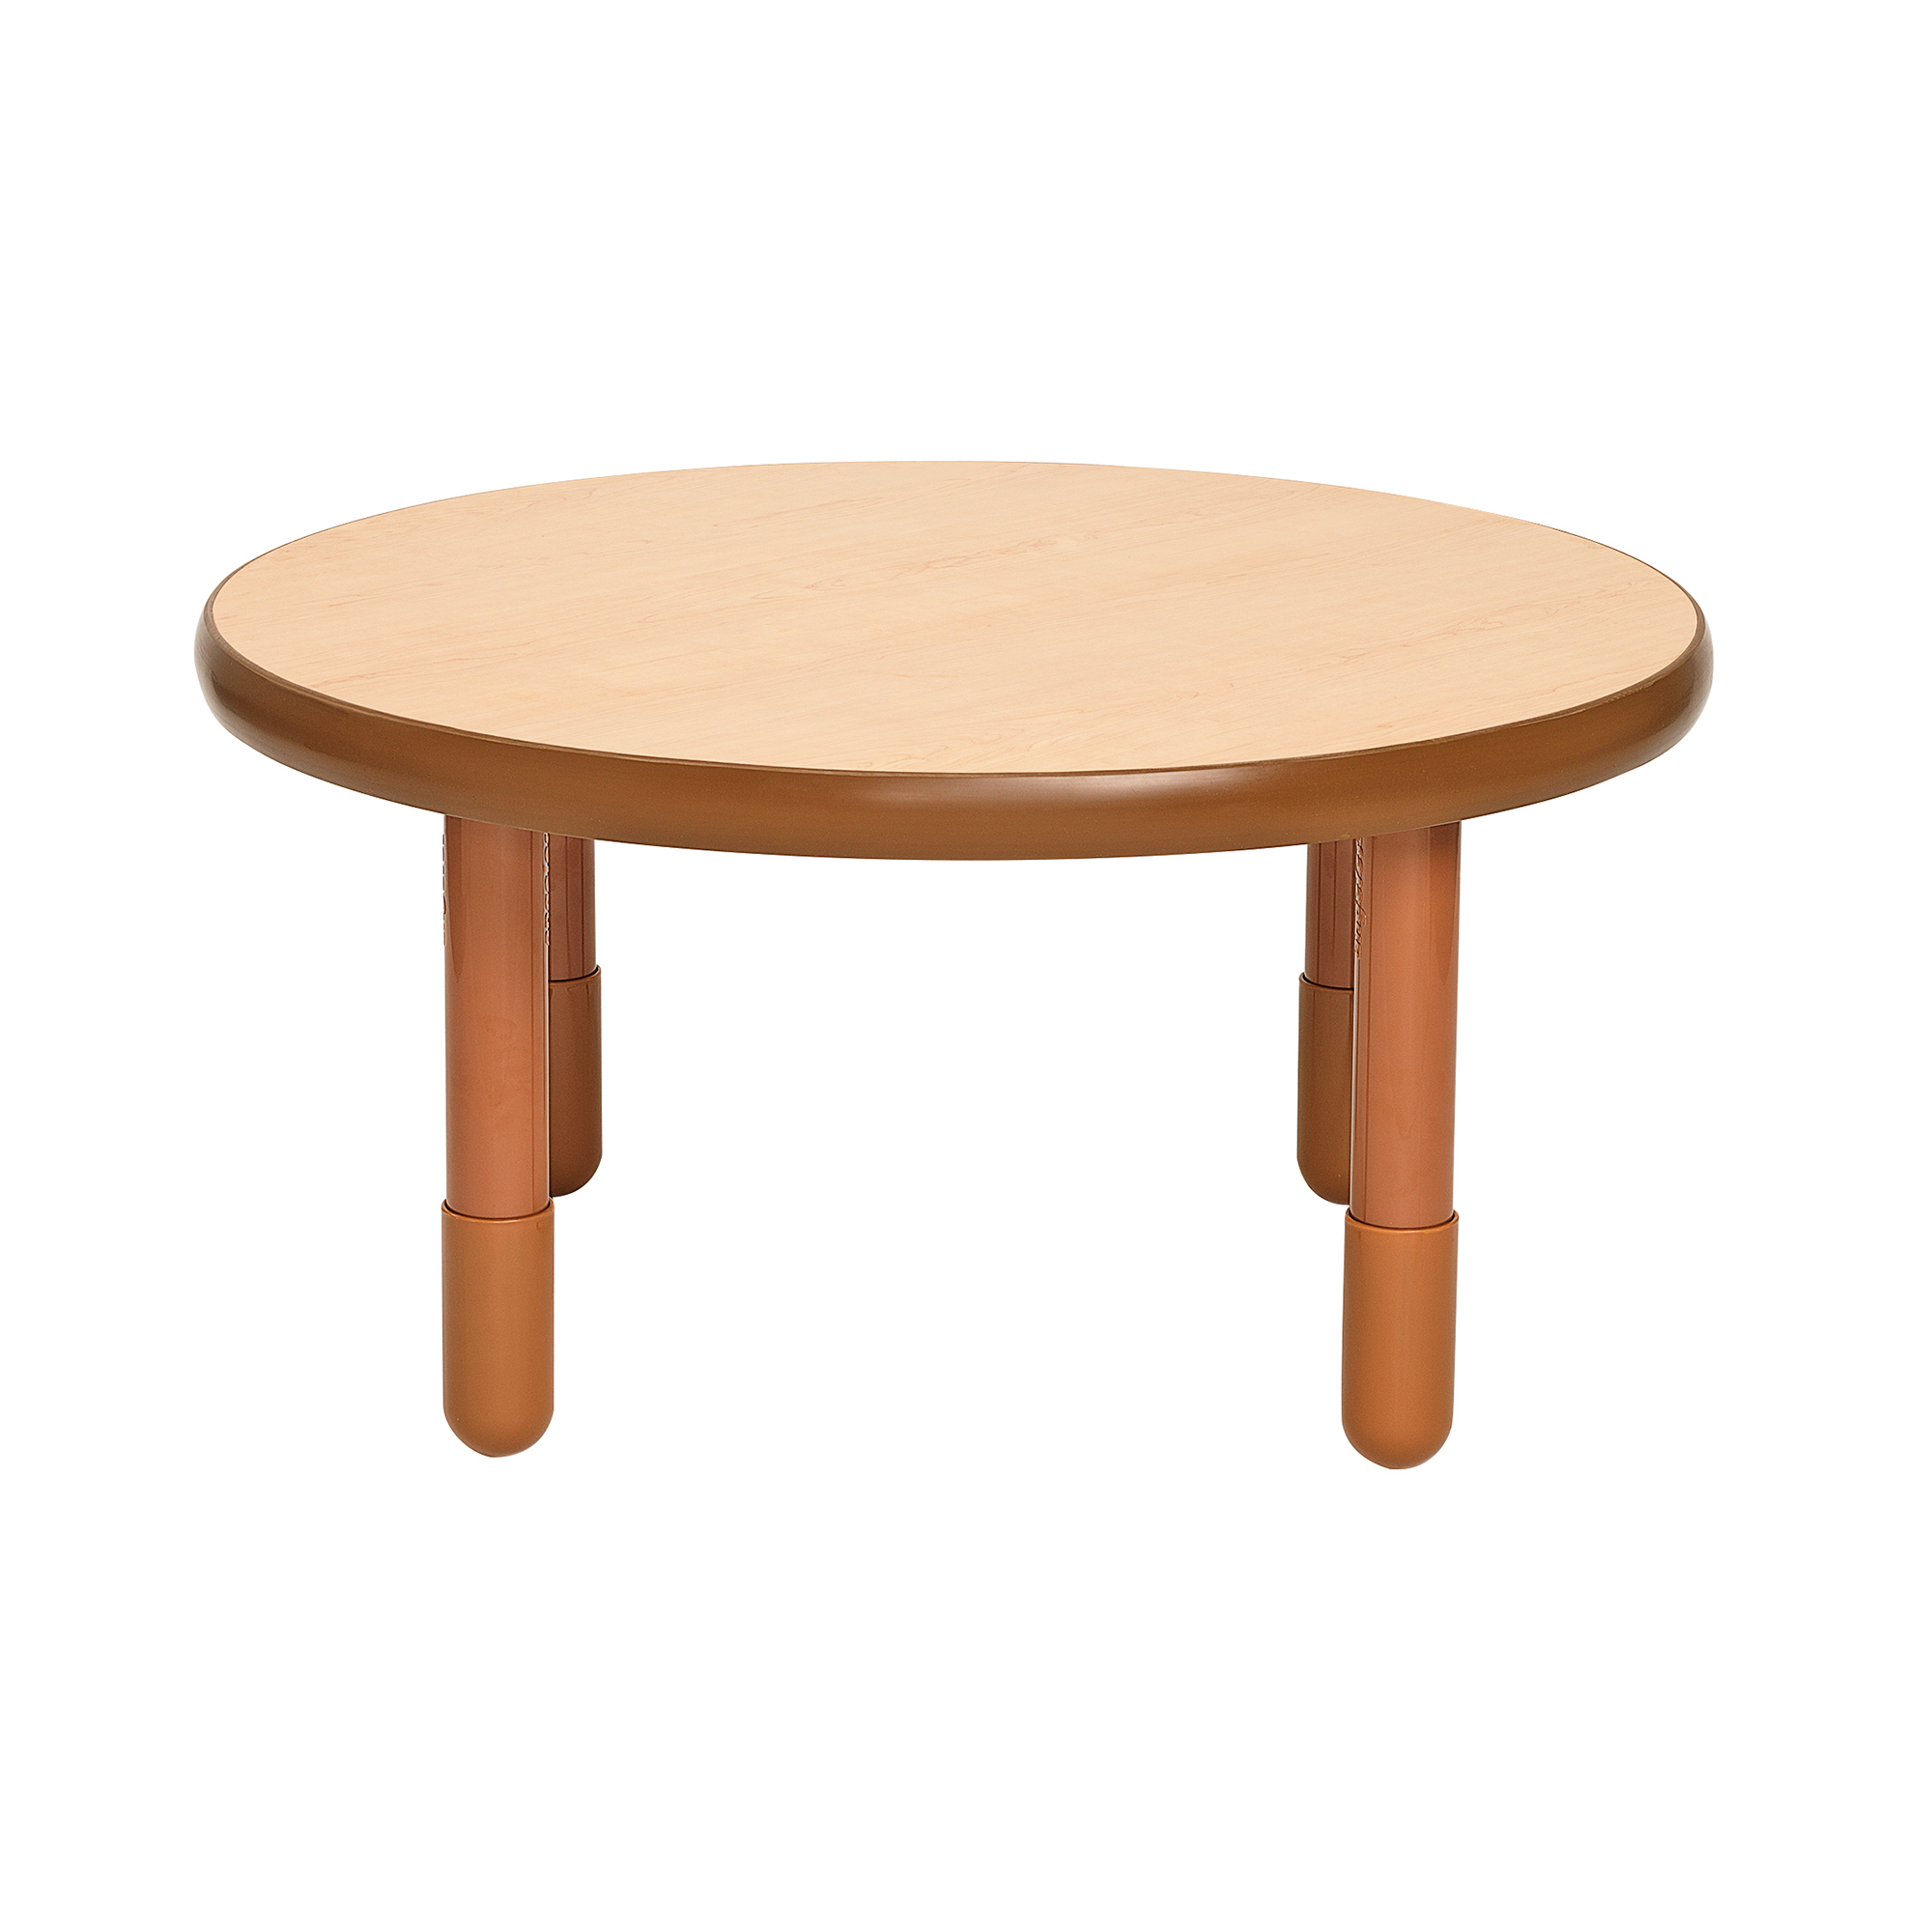 BaseLine® 91,5 cm Diameter Round Table - Natural Wood with 45,5 cm  Legs